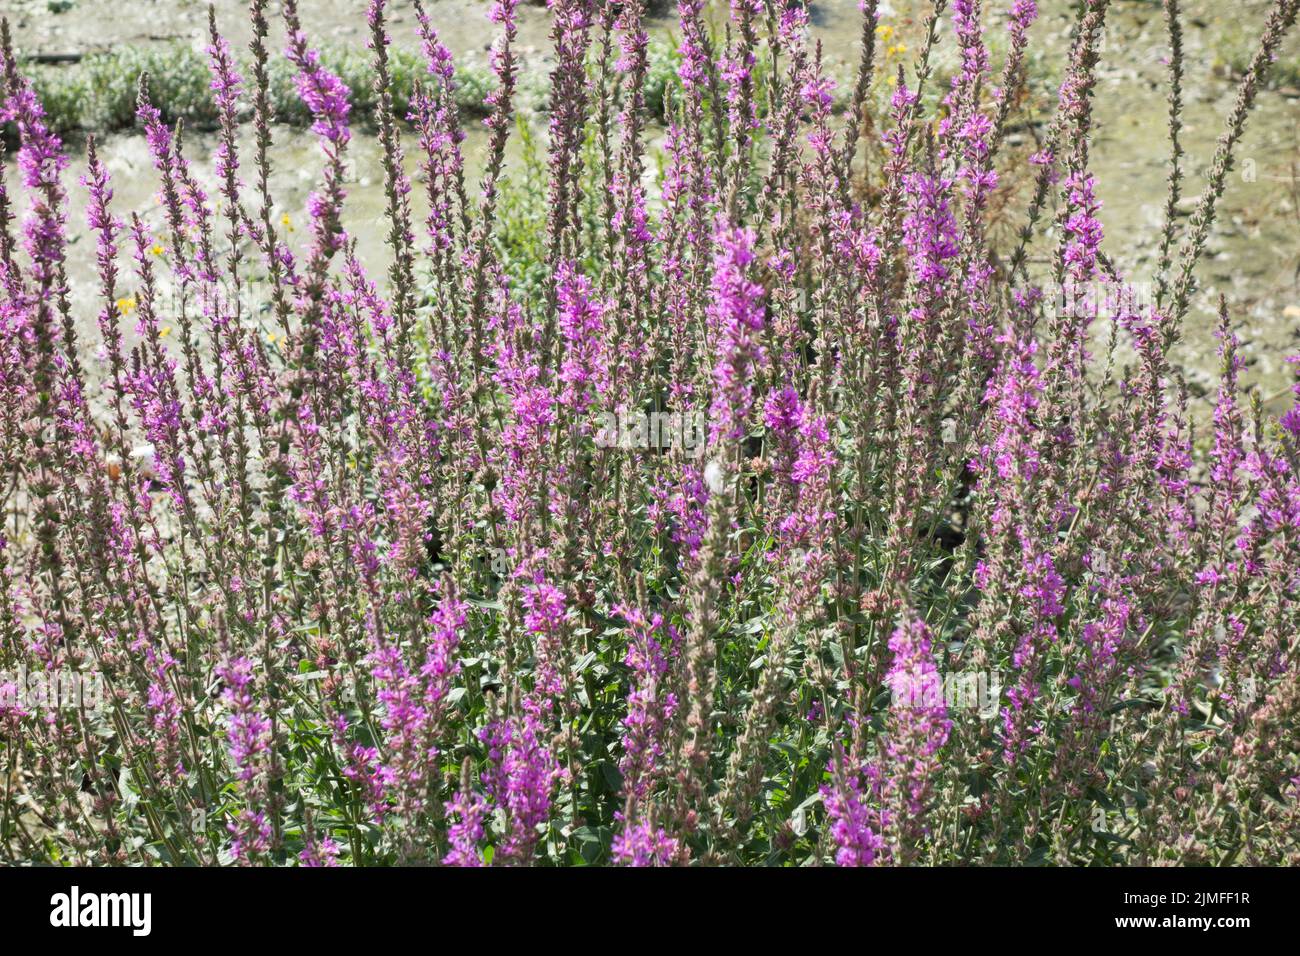 Purple Loosestrife (Lythrum salicaria) on the banks of the River Thames in London, England, UK Stock Photo